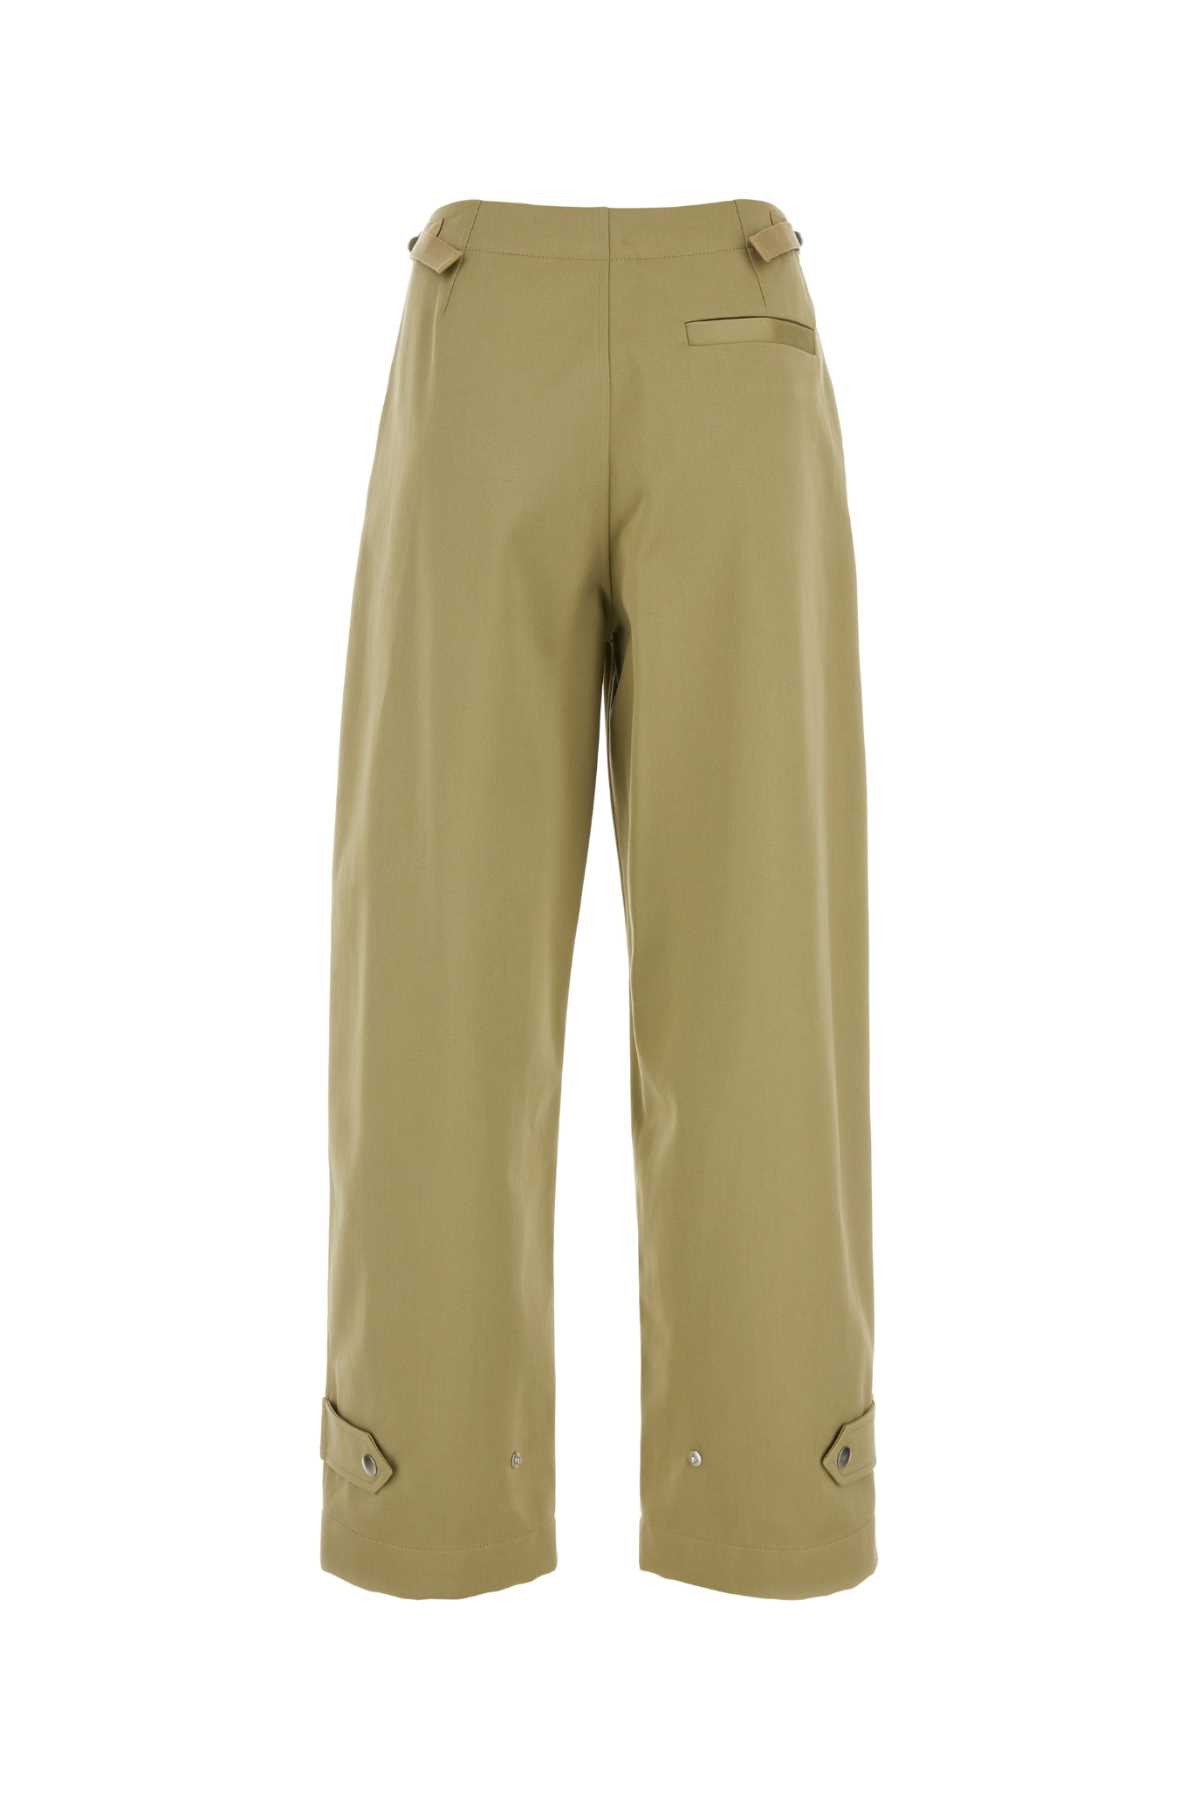 Burberry Military Green Cotton Pant In Hunter